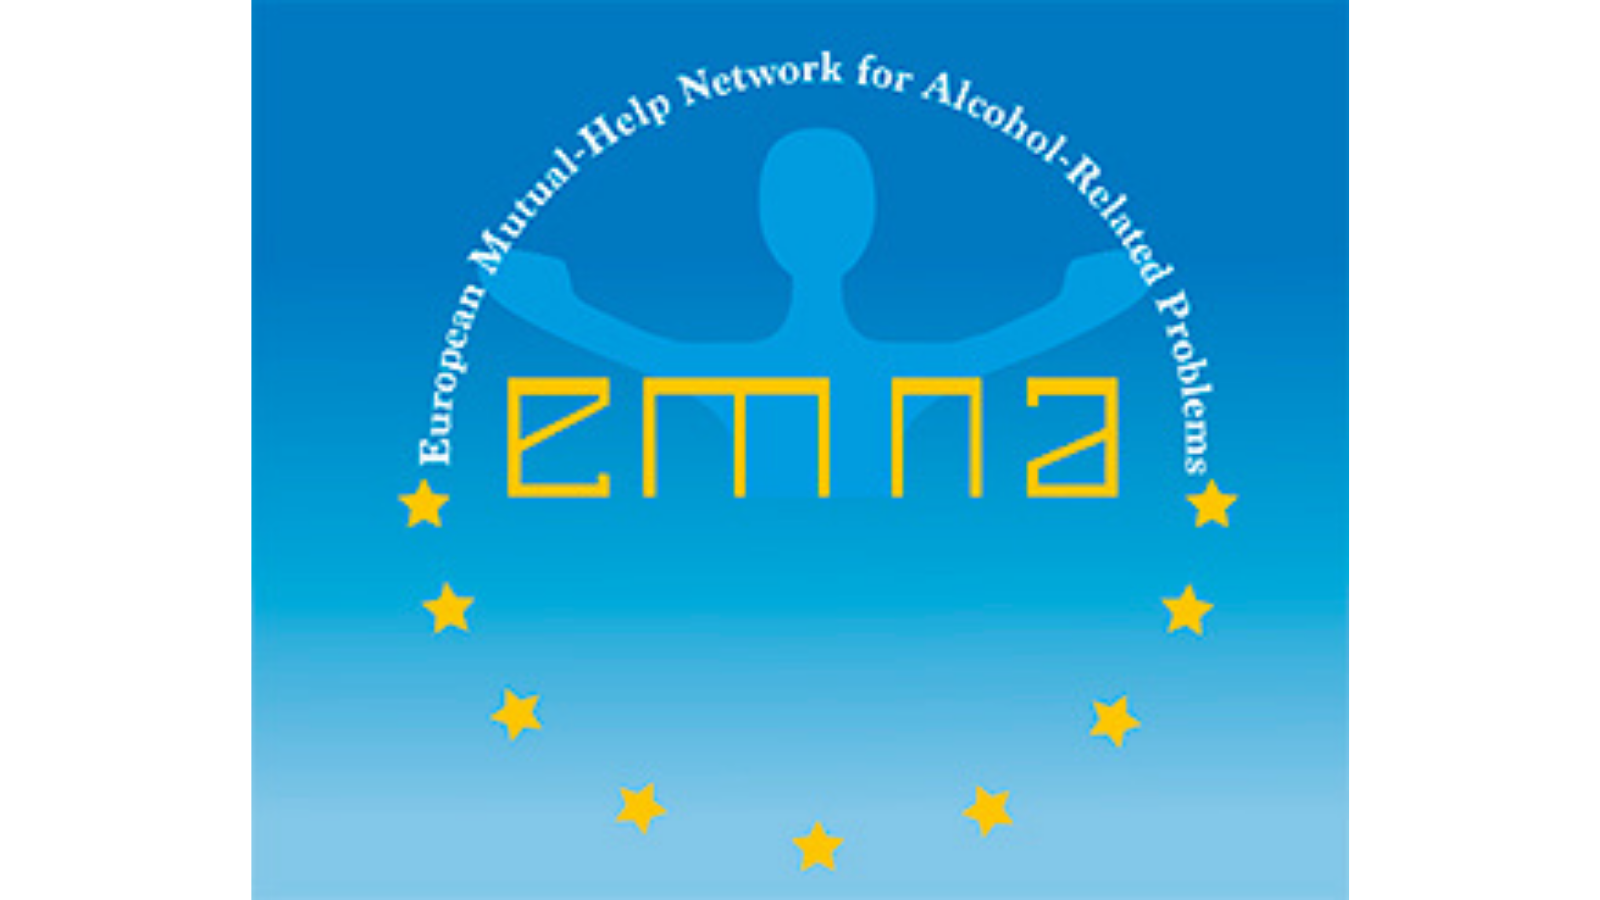 European Mutual-Help Network for Alcohol-Related Problems